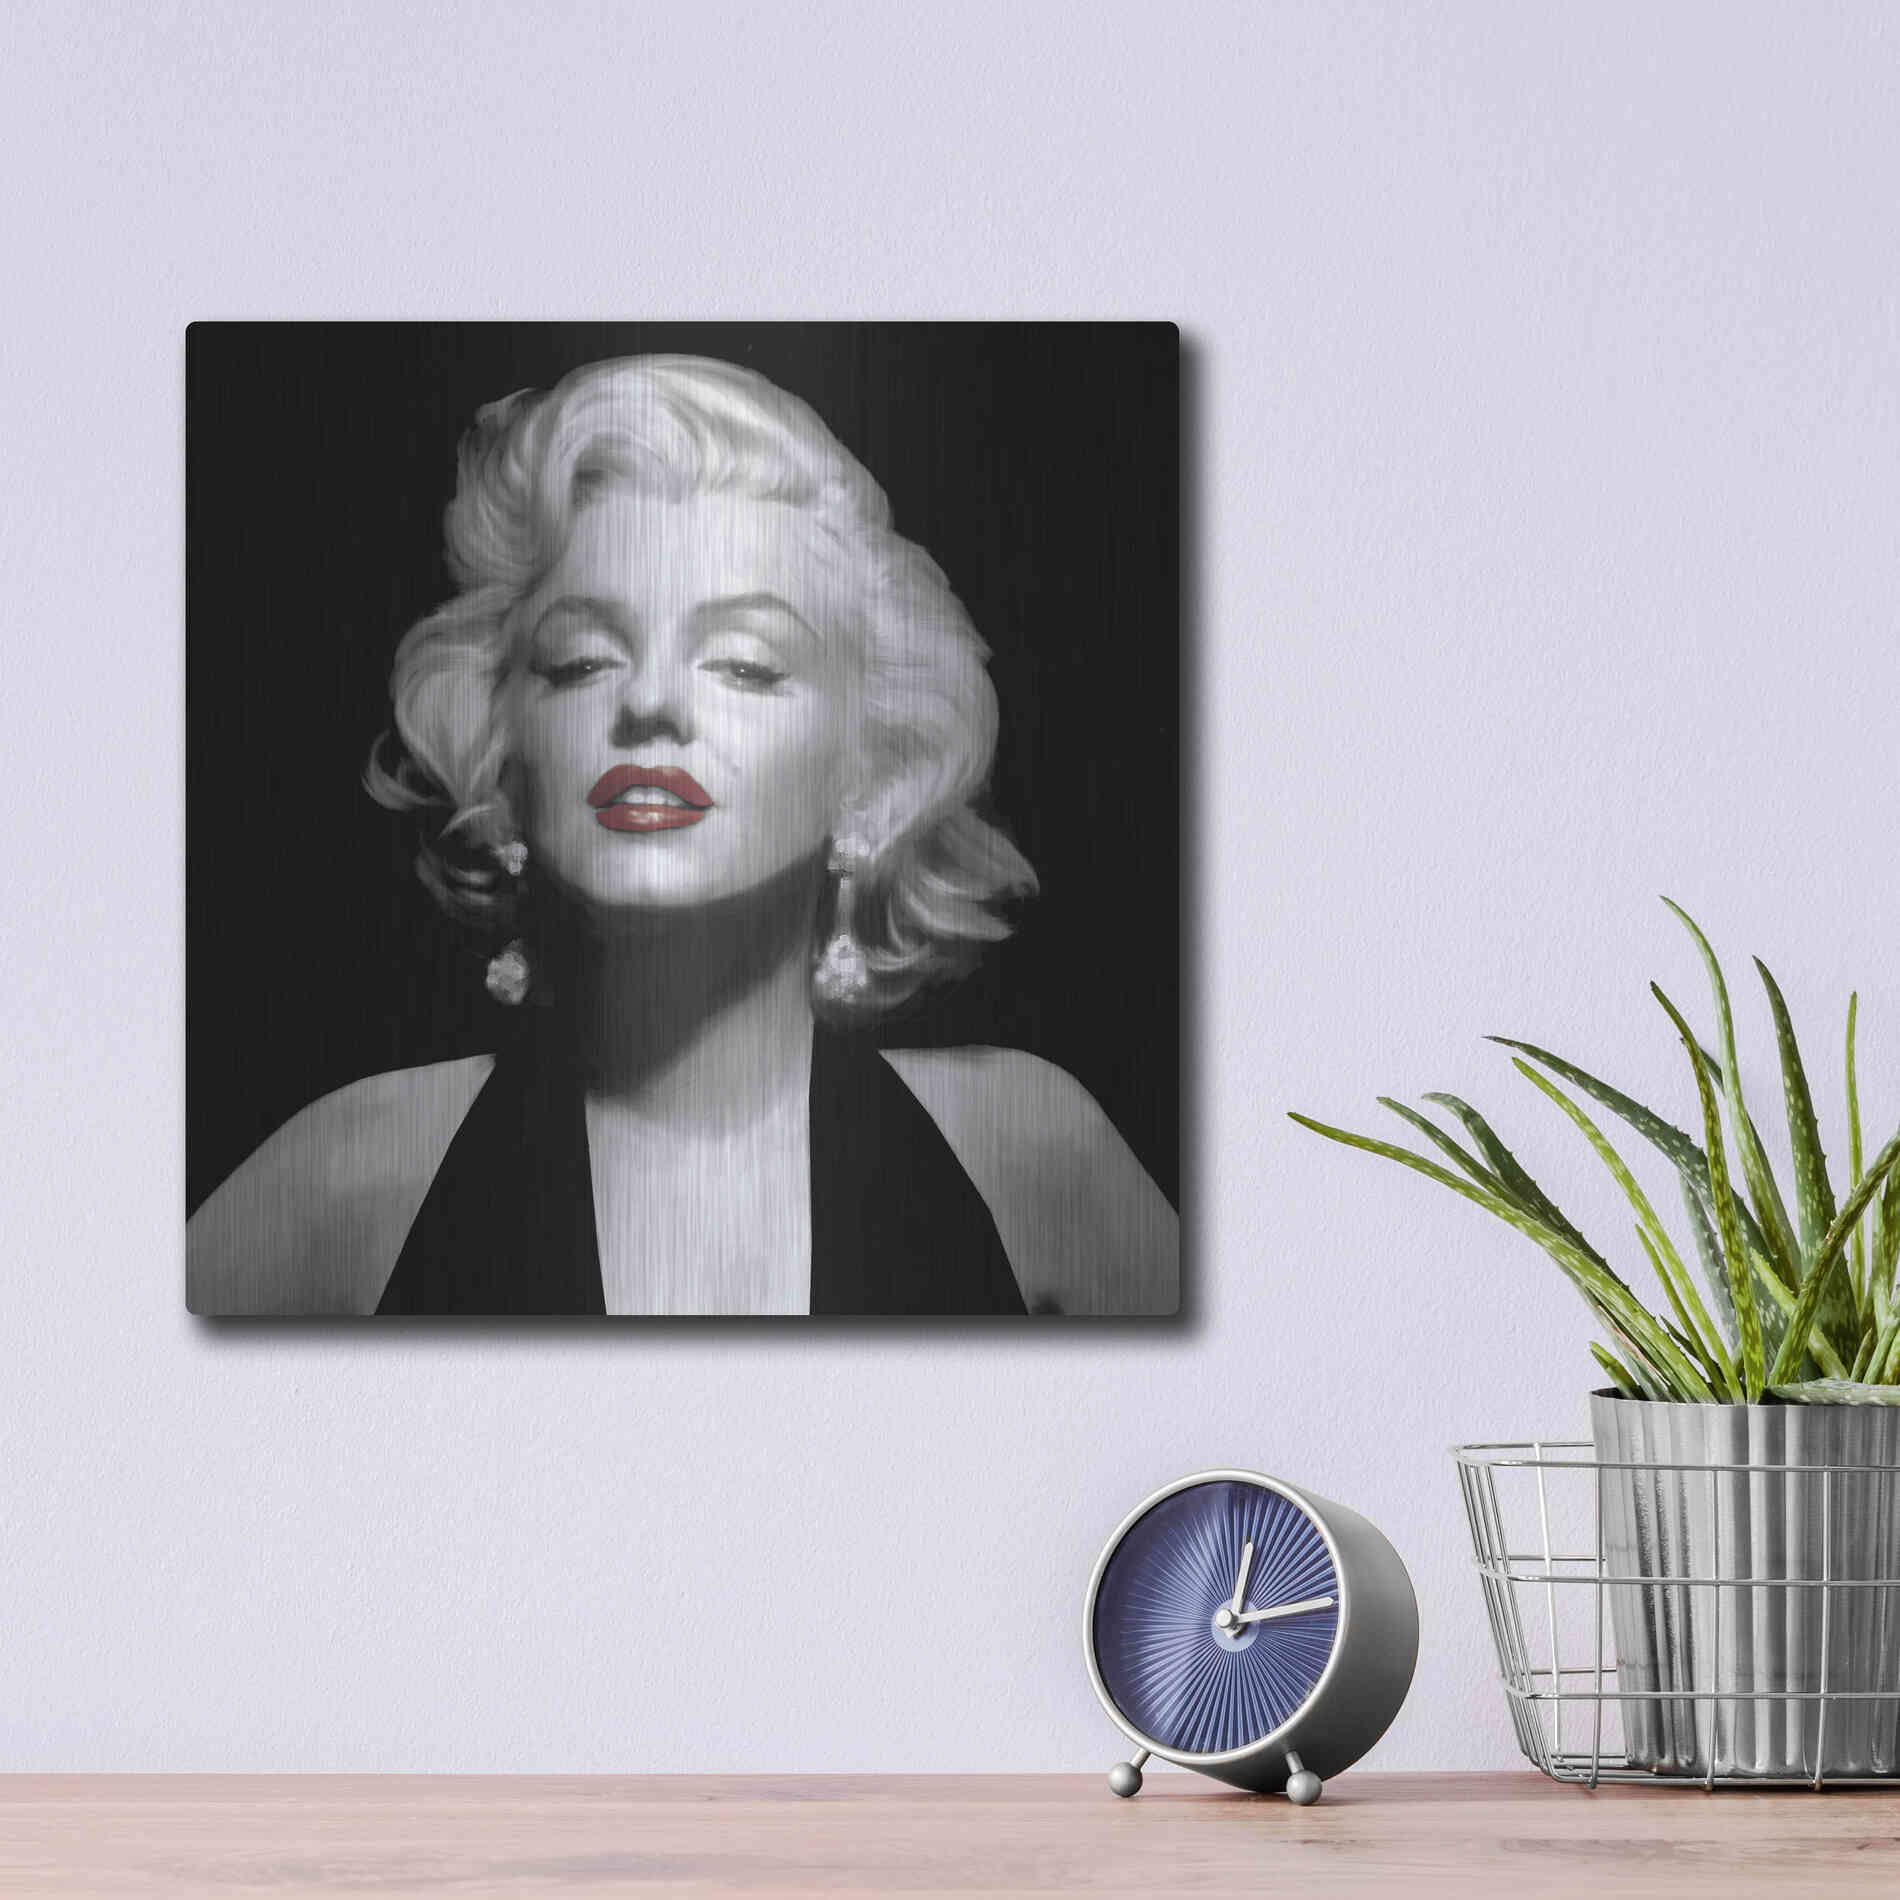 Luxe Metal Art 'Halter Top Marilyn Red Lips' by Chris Consani, Metal Wall Art,12x12